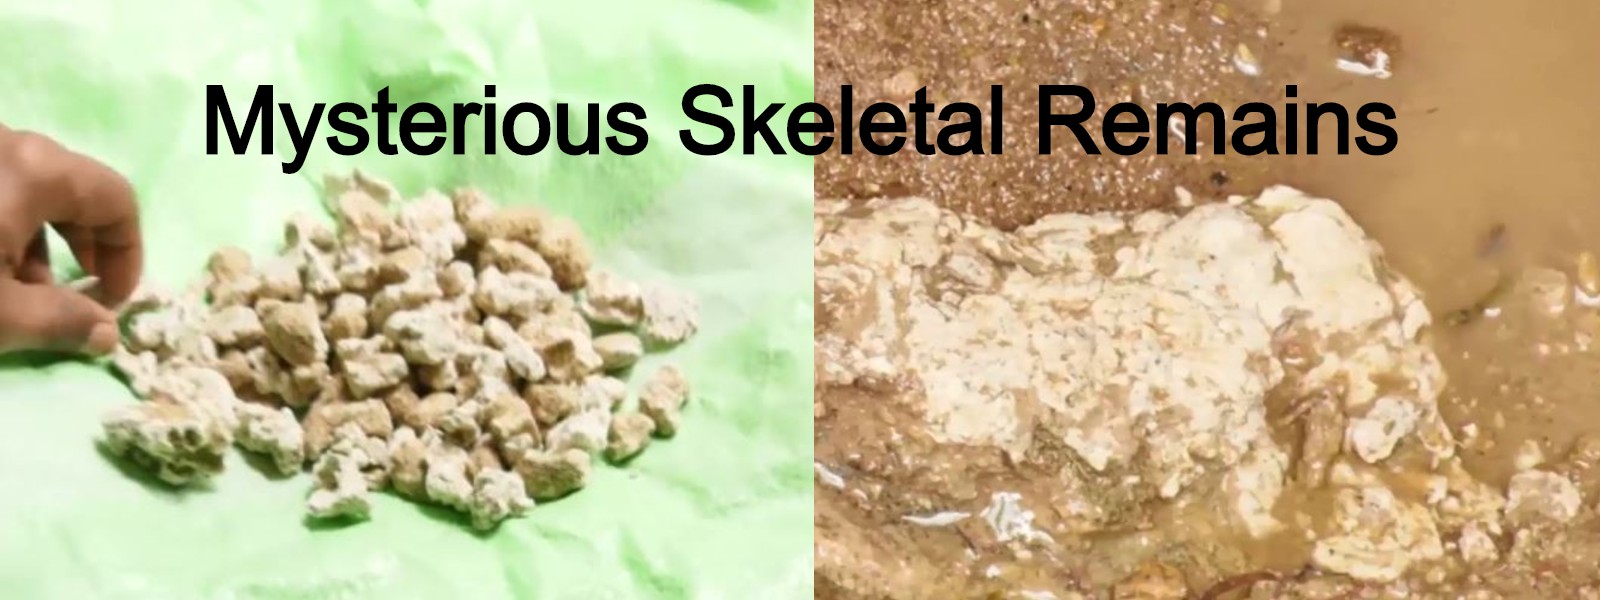 Mysterious skeletal remains from Kurunegala sent for tests